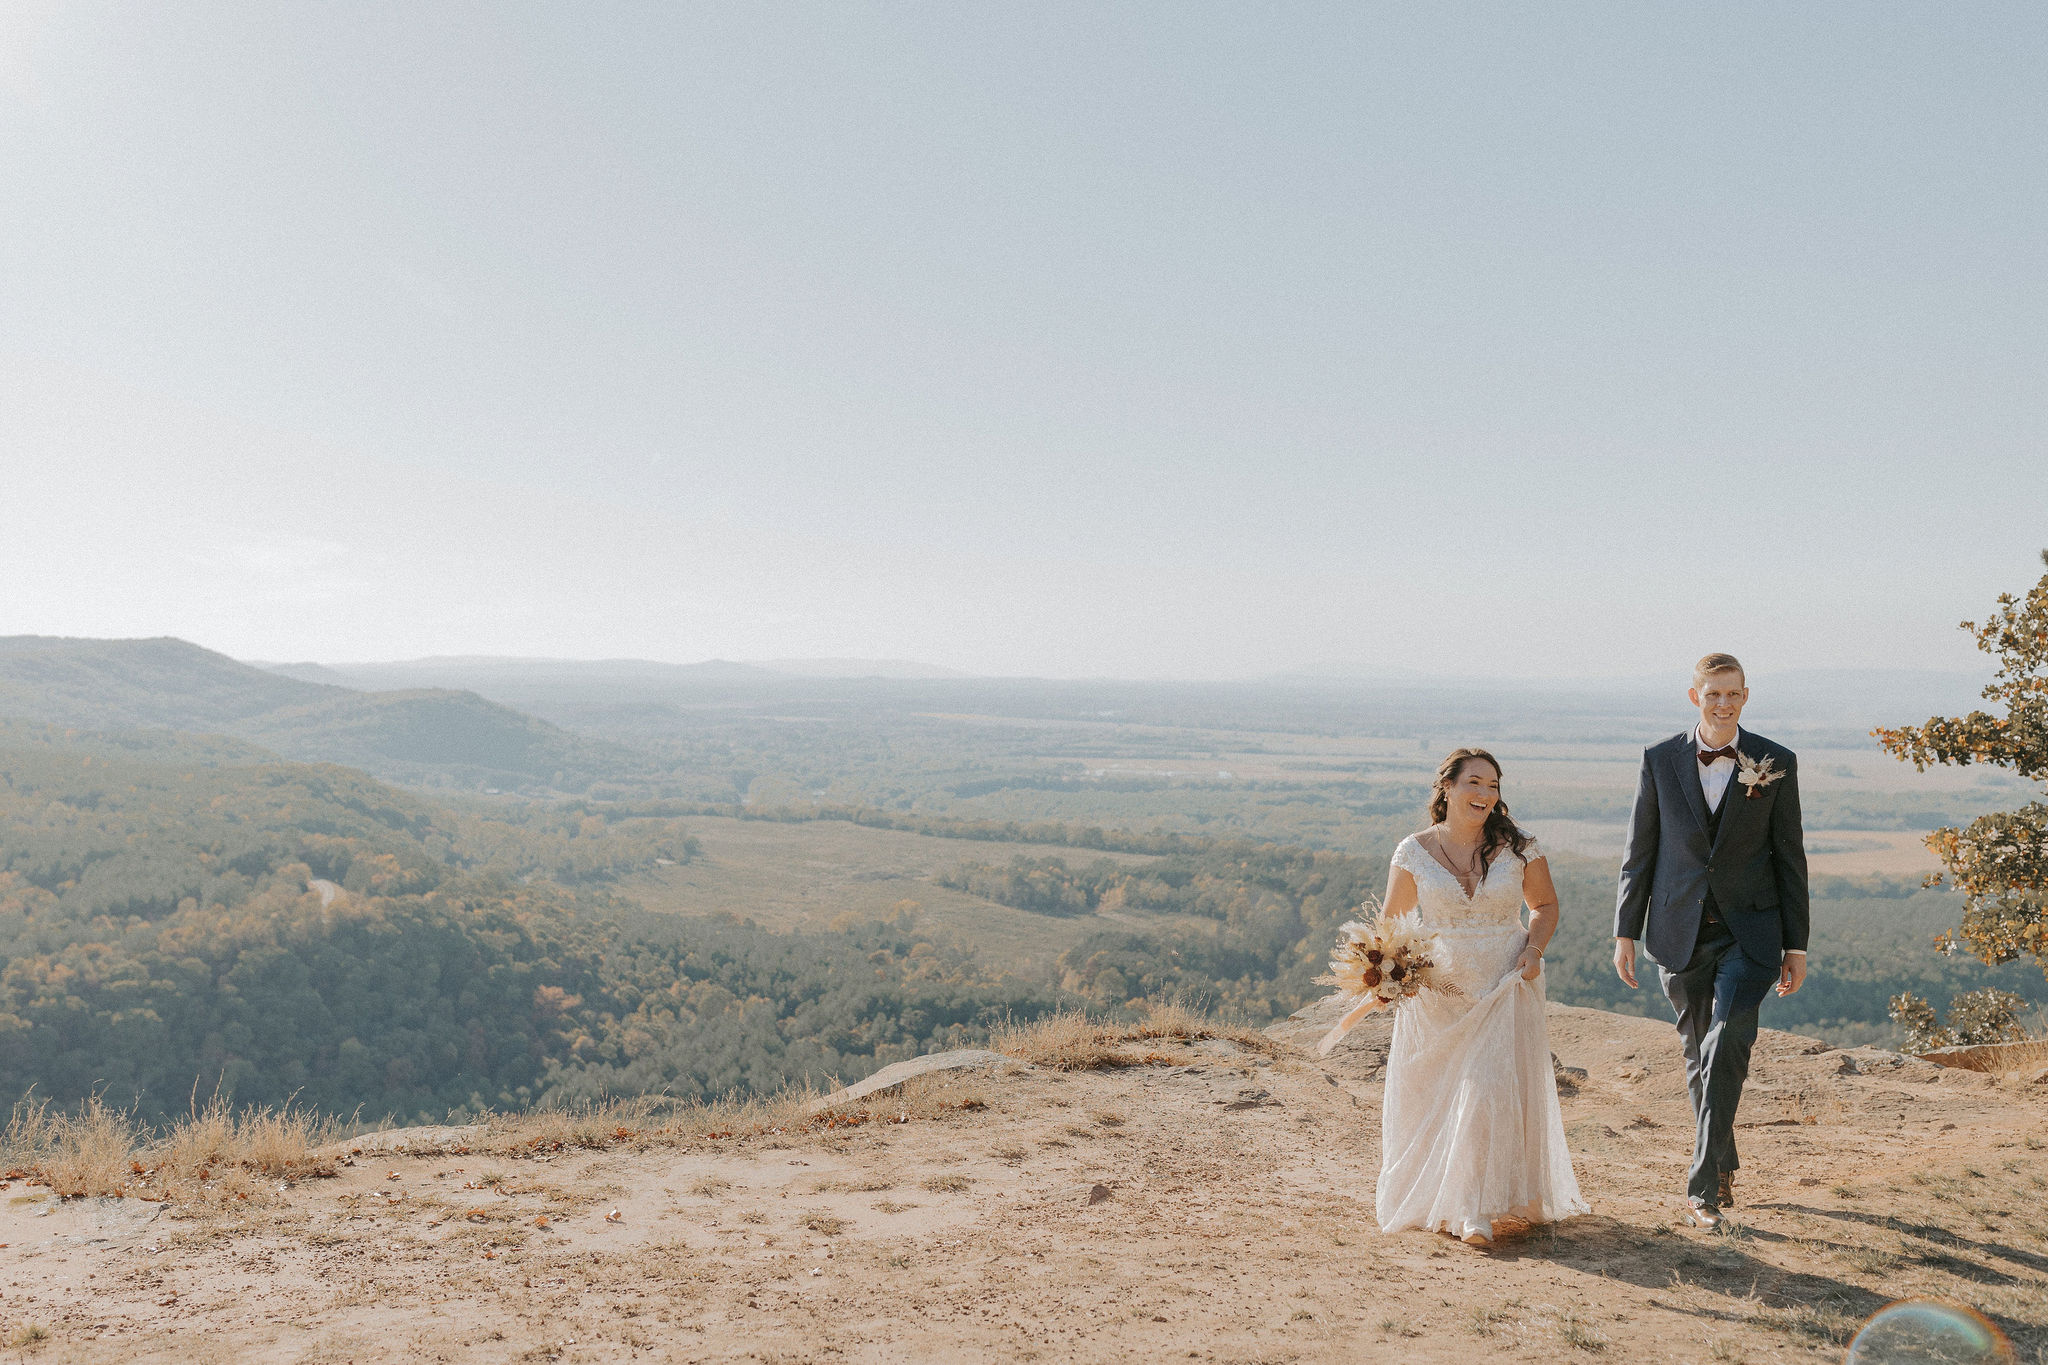 A couple in wedding attire walk towards the camera at CCC Overlook at Petit Jean State Park in Arkansas. The bride is in a white floor-length dress holding a dried floral arrangement and the groom is in a navy blue suit.